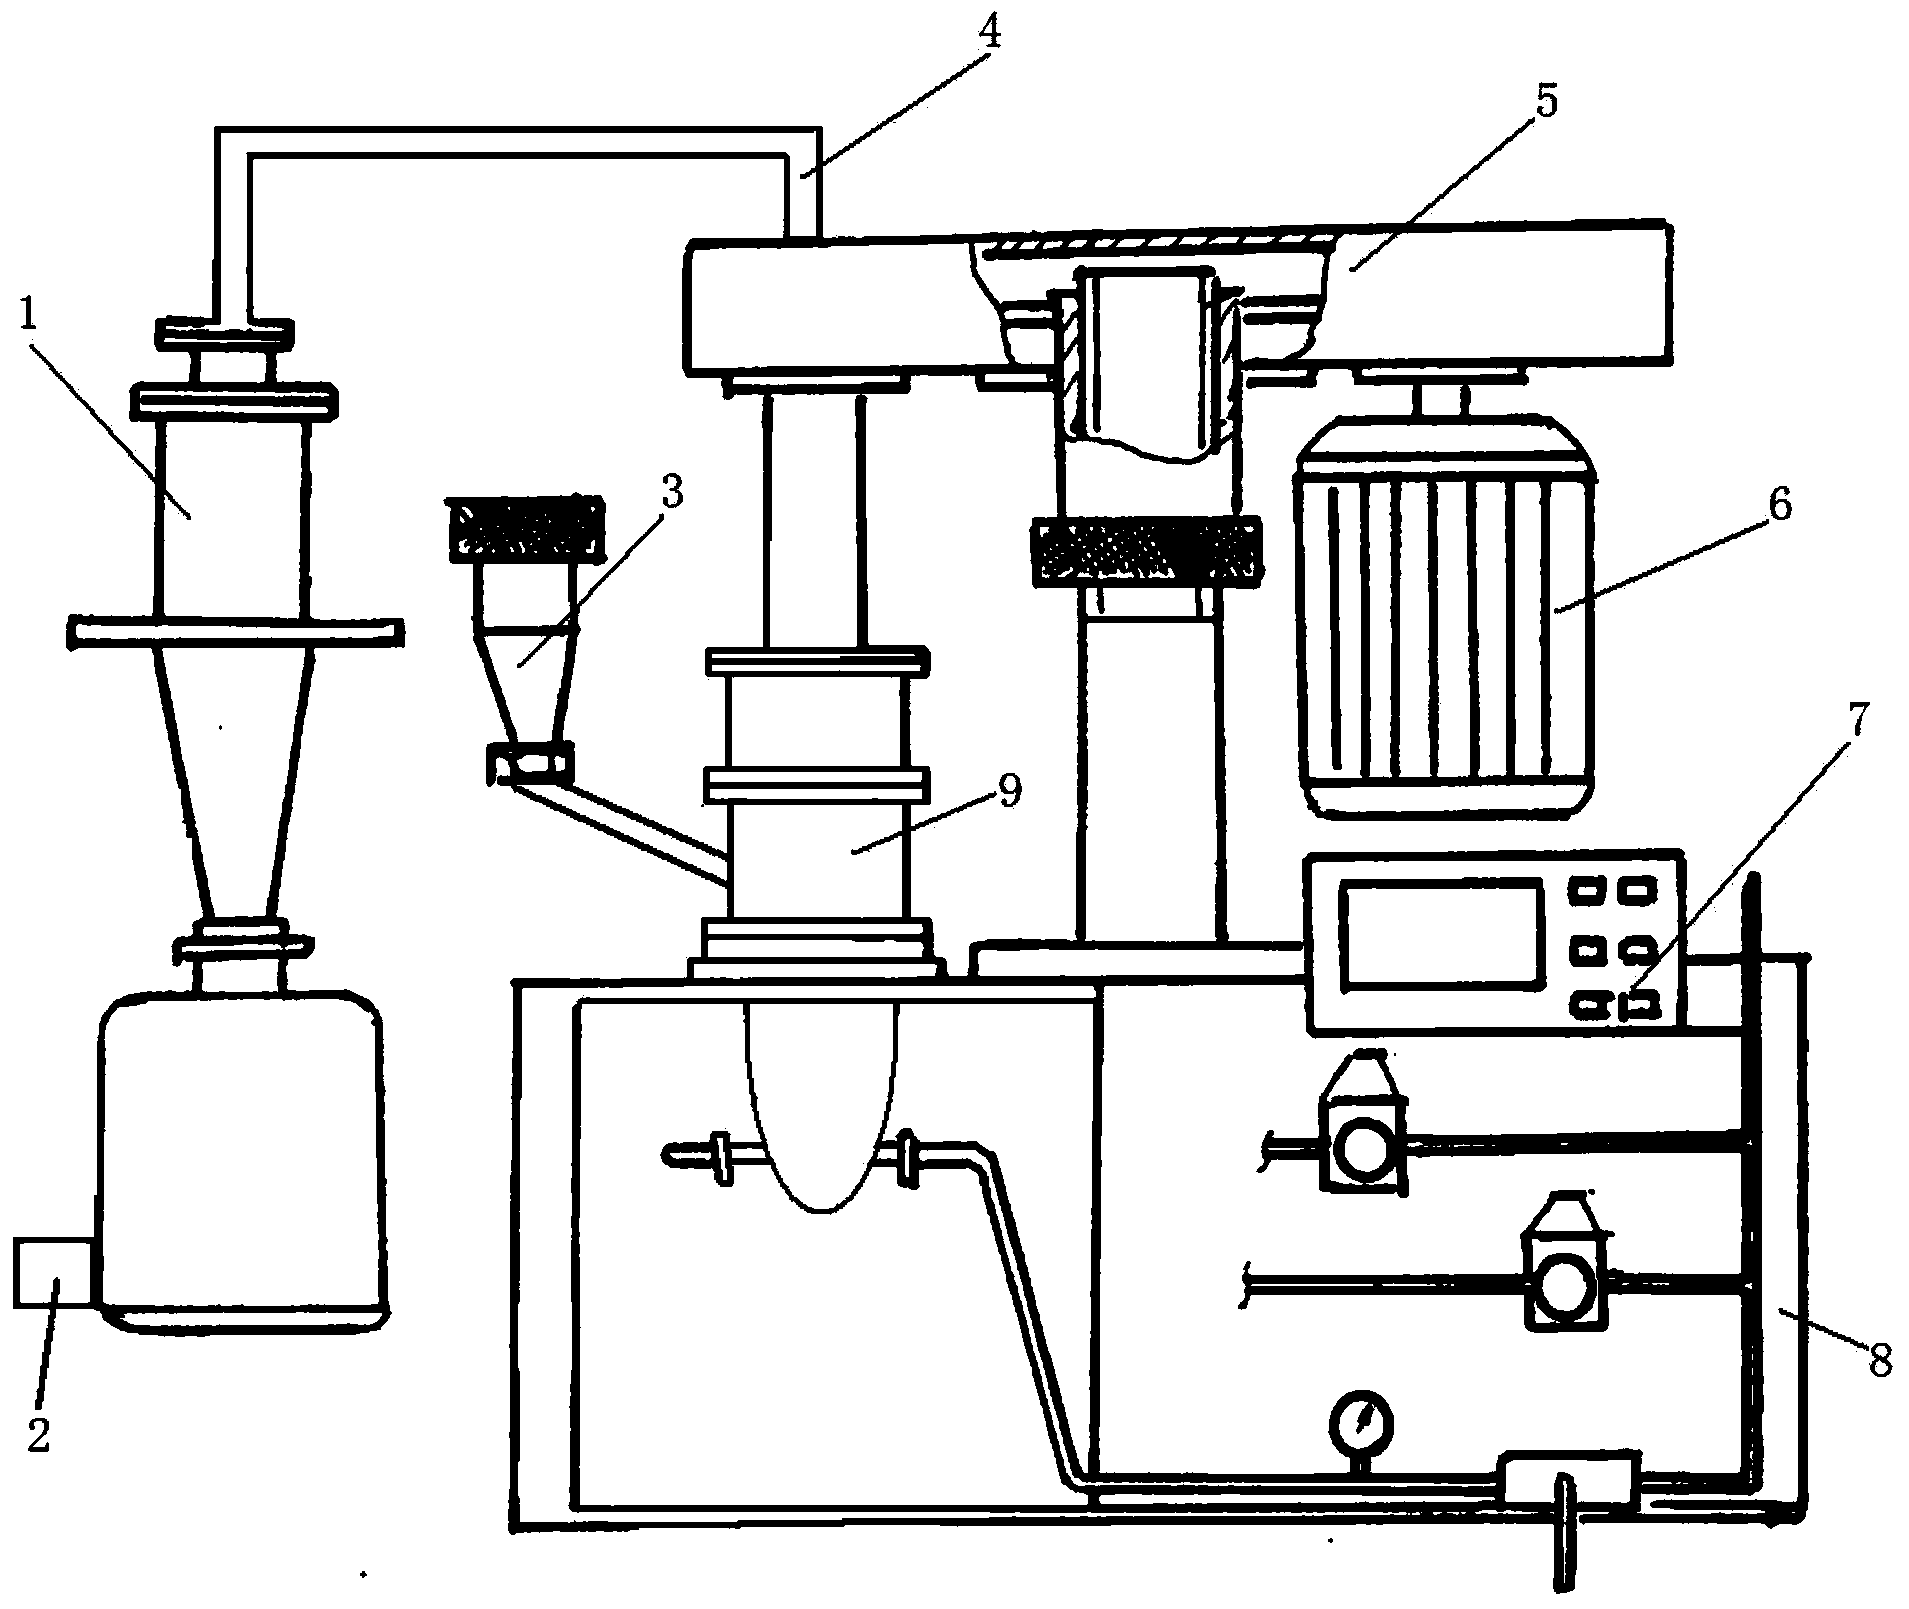 Miniature negative pressure jet mill having crushing cavity with ellipsoidal structure